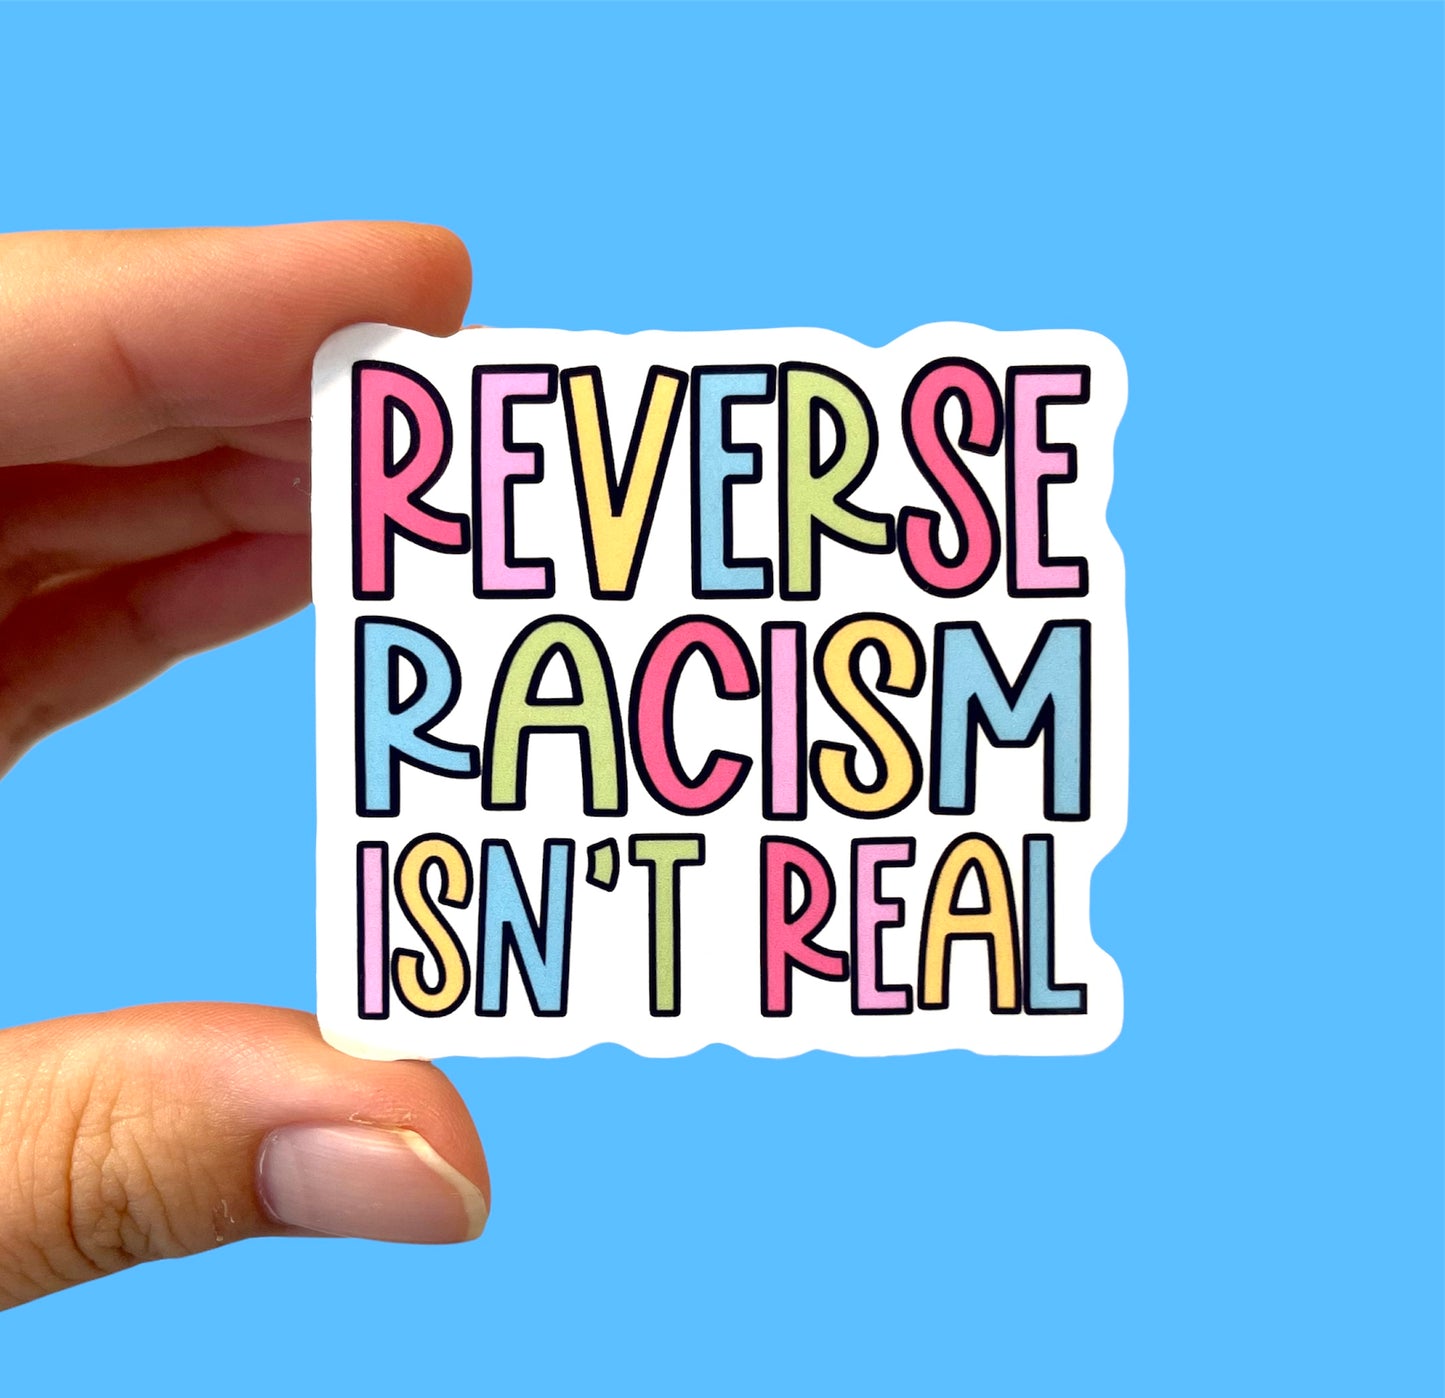 Reverse racism isn’t real